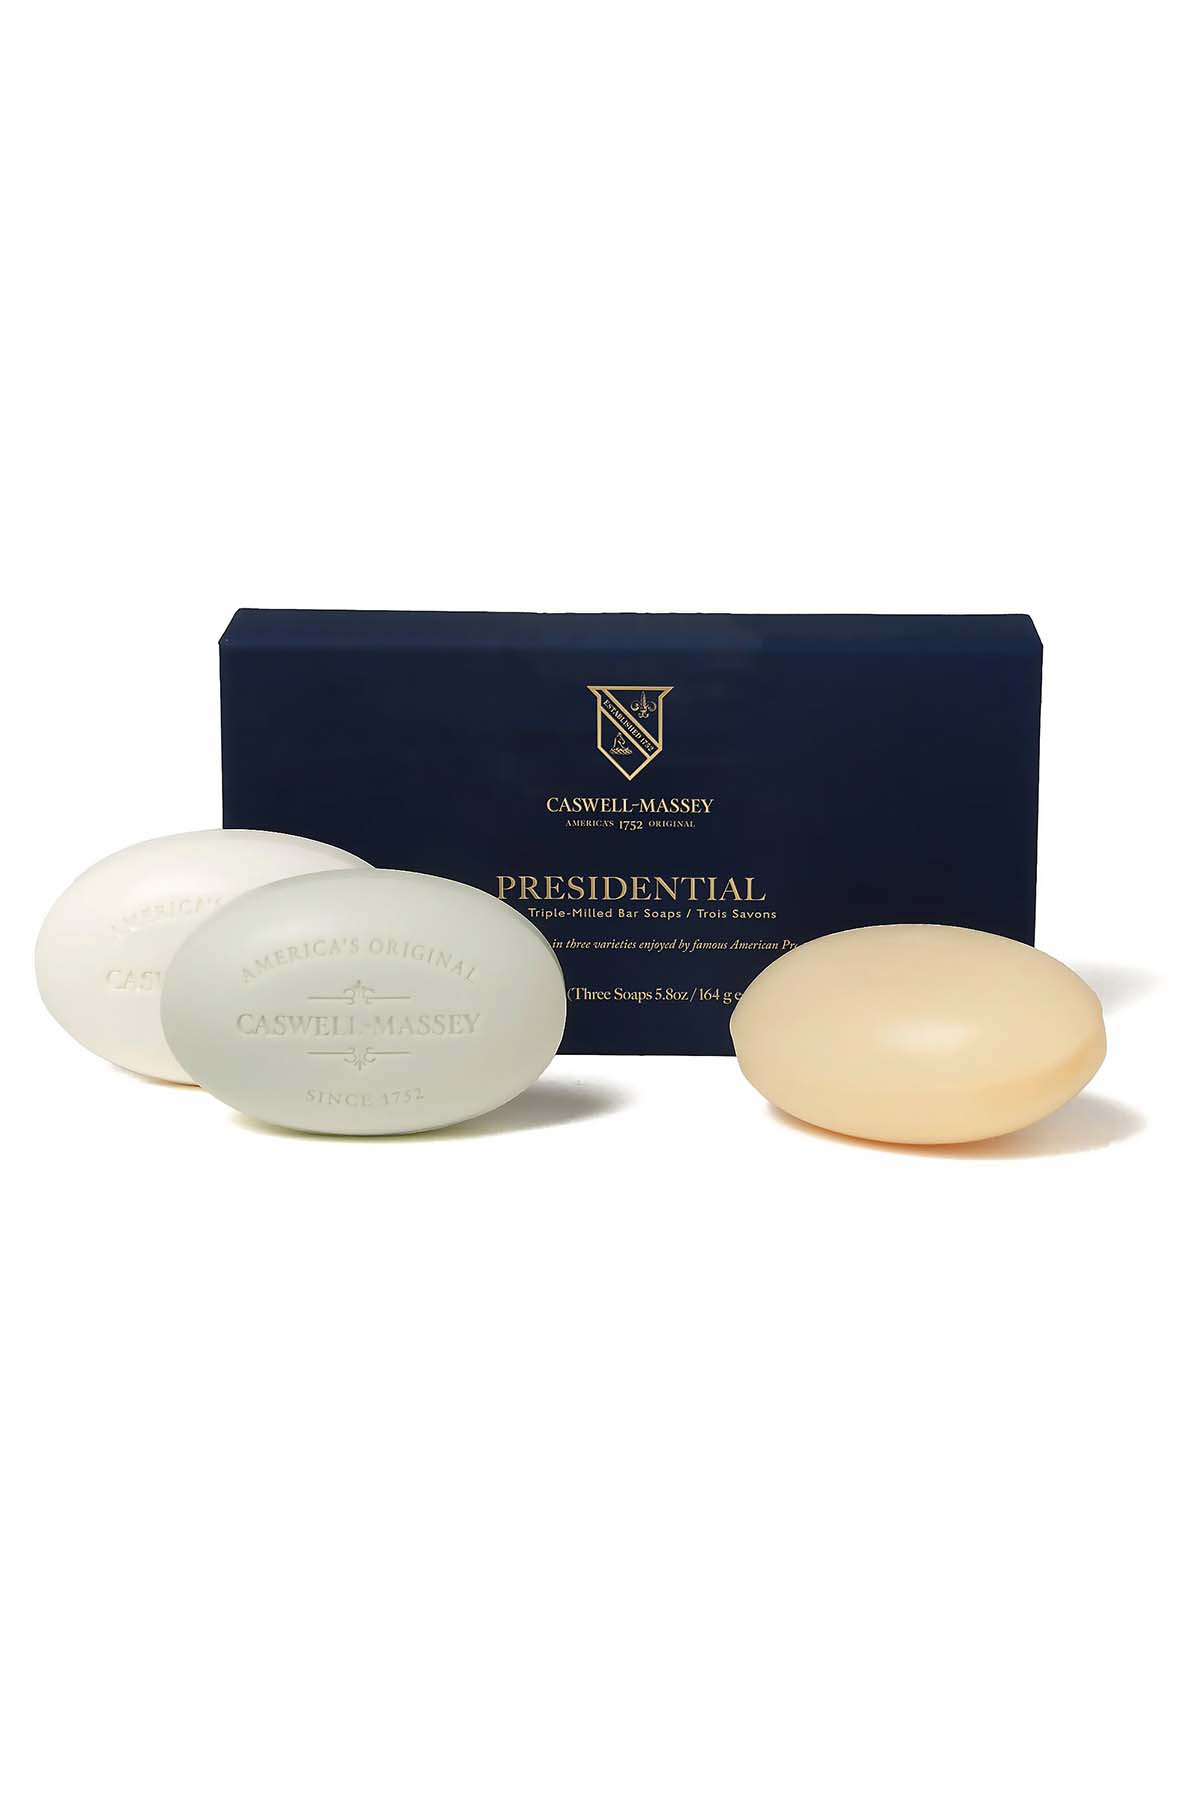 Caswell-Massey Heritage Presidential Three Soap Set